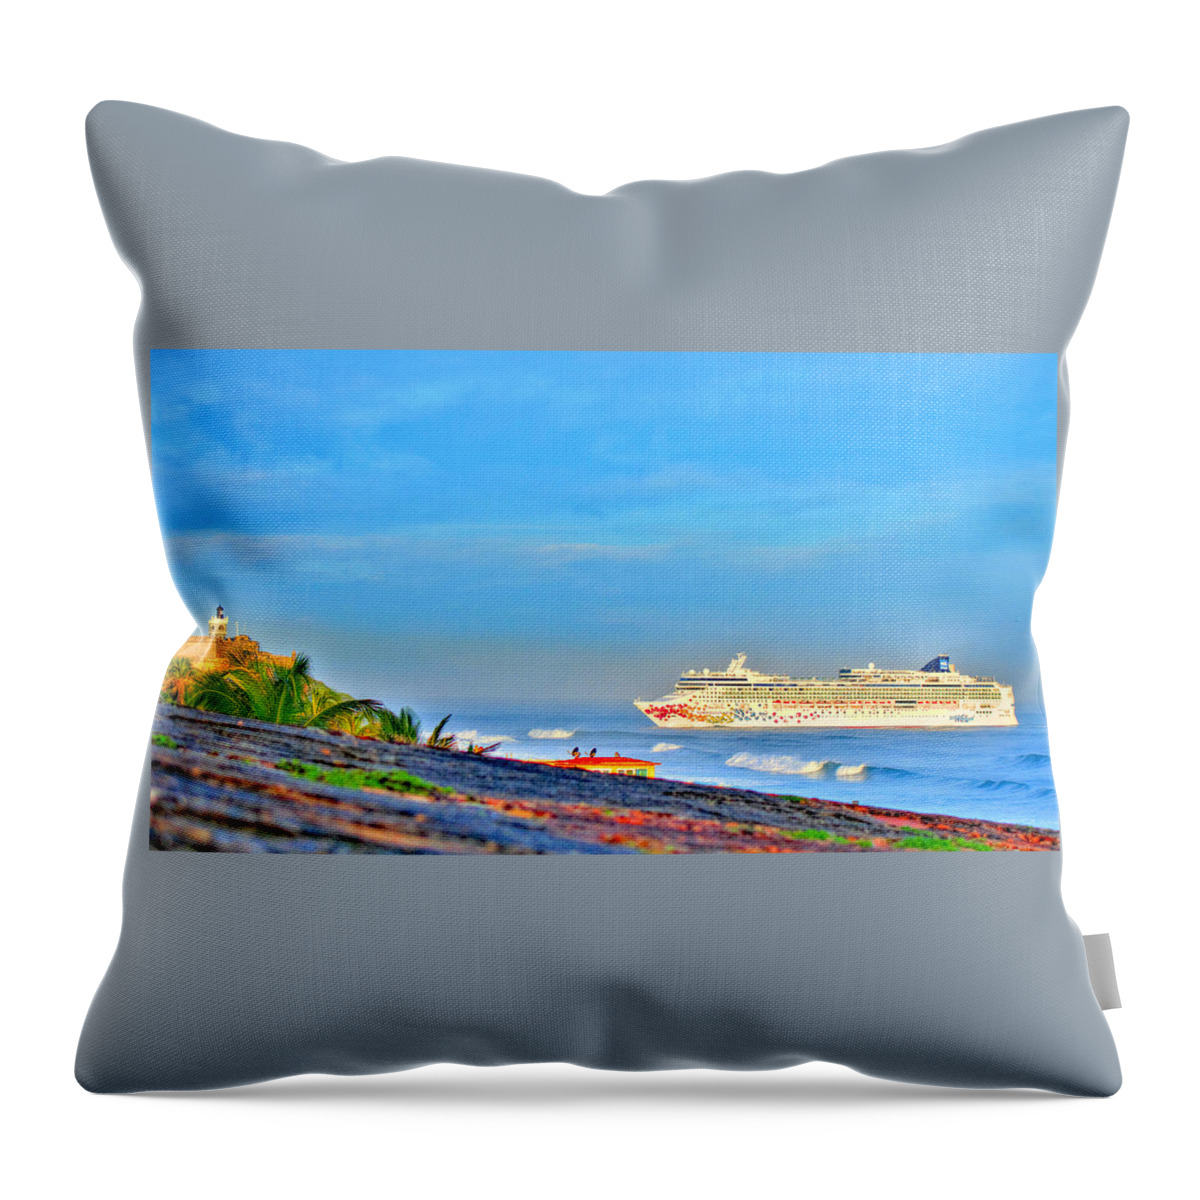 Cruise Throw Pillow featuring the photograph San Juan Puerto Rico Cruise Ship by Lawrence S Richardson Jr